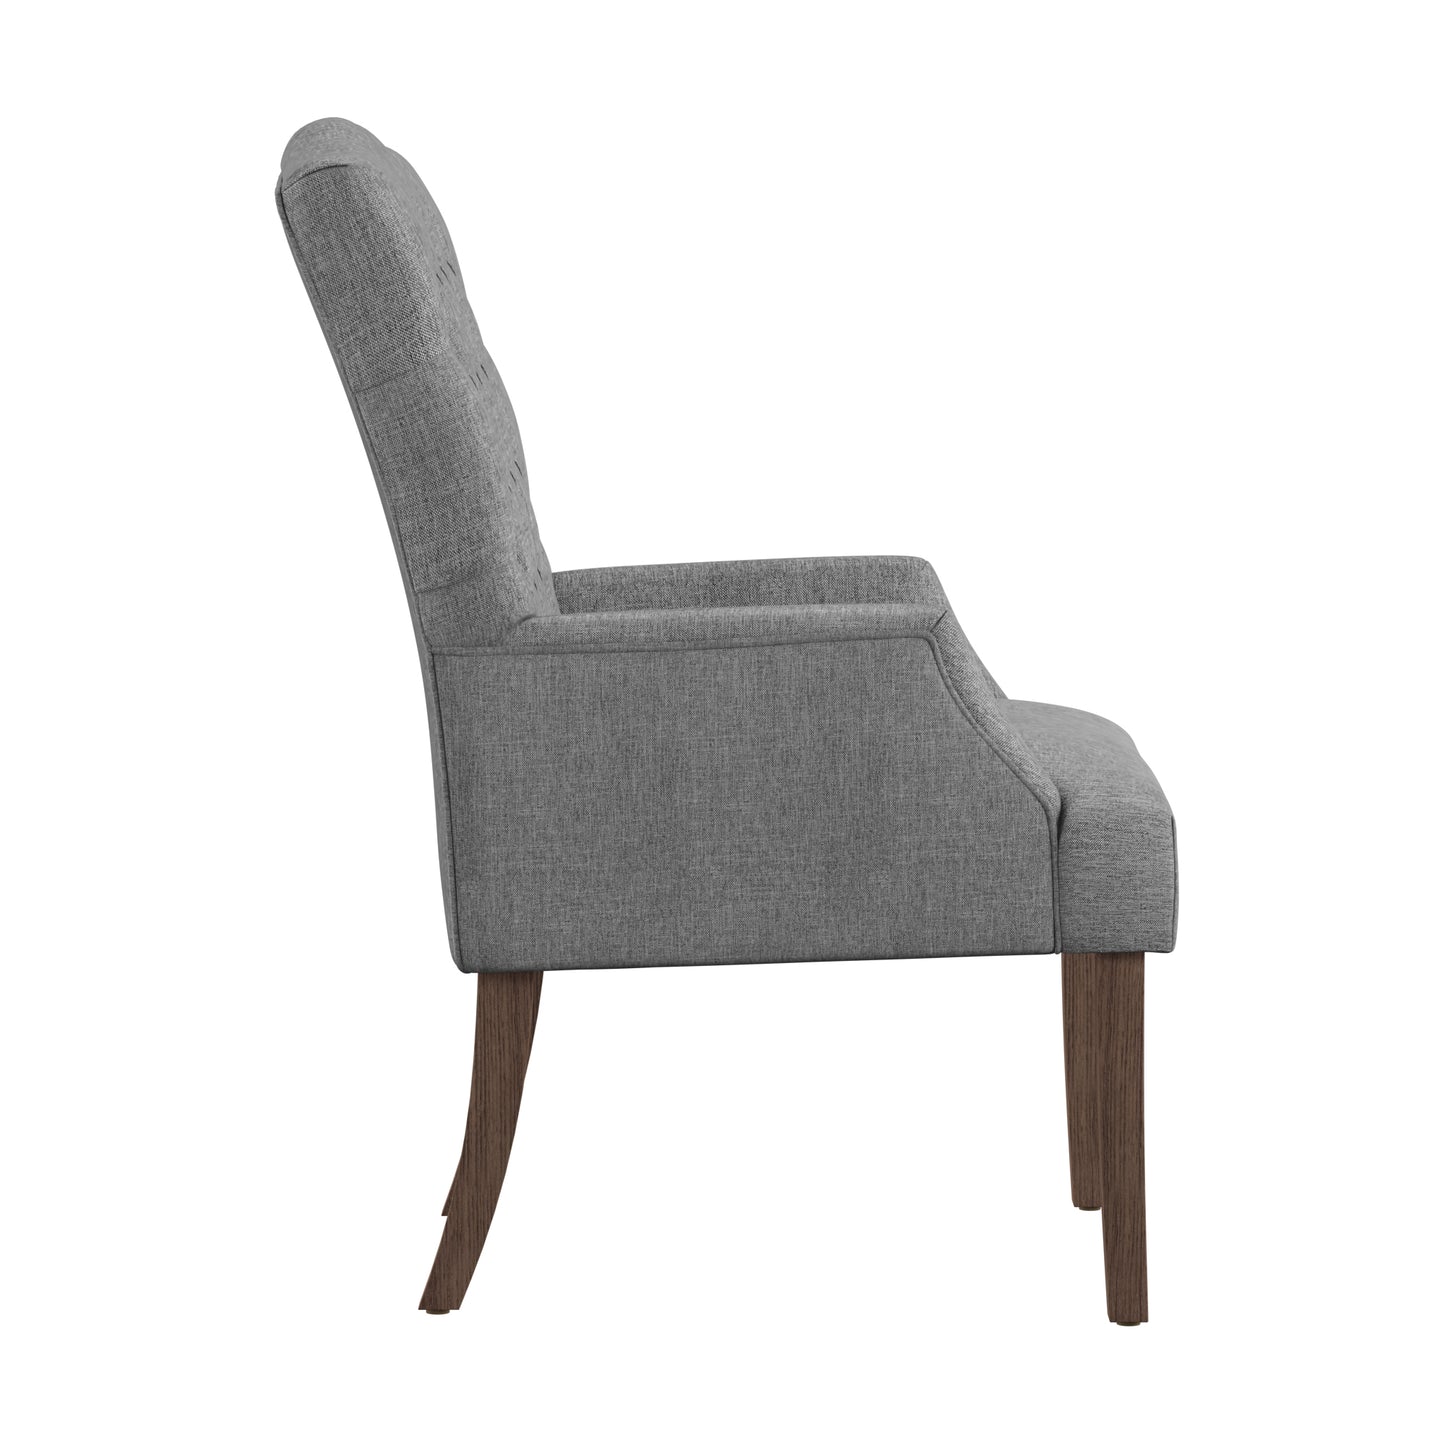 Light Distressed Natural Finish Linen Tufted Dining Chair - Grey Linen